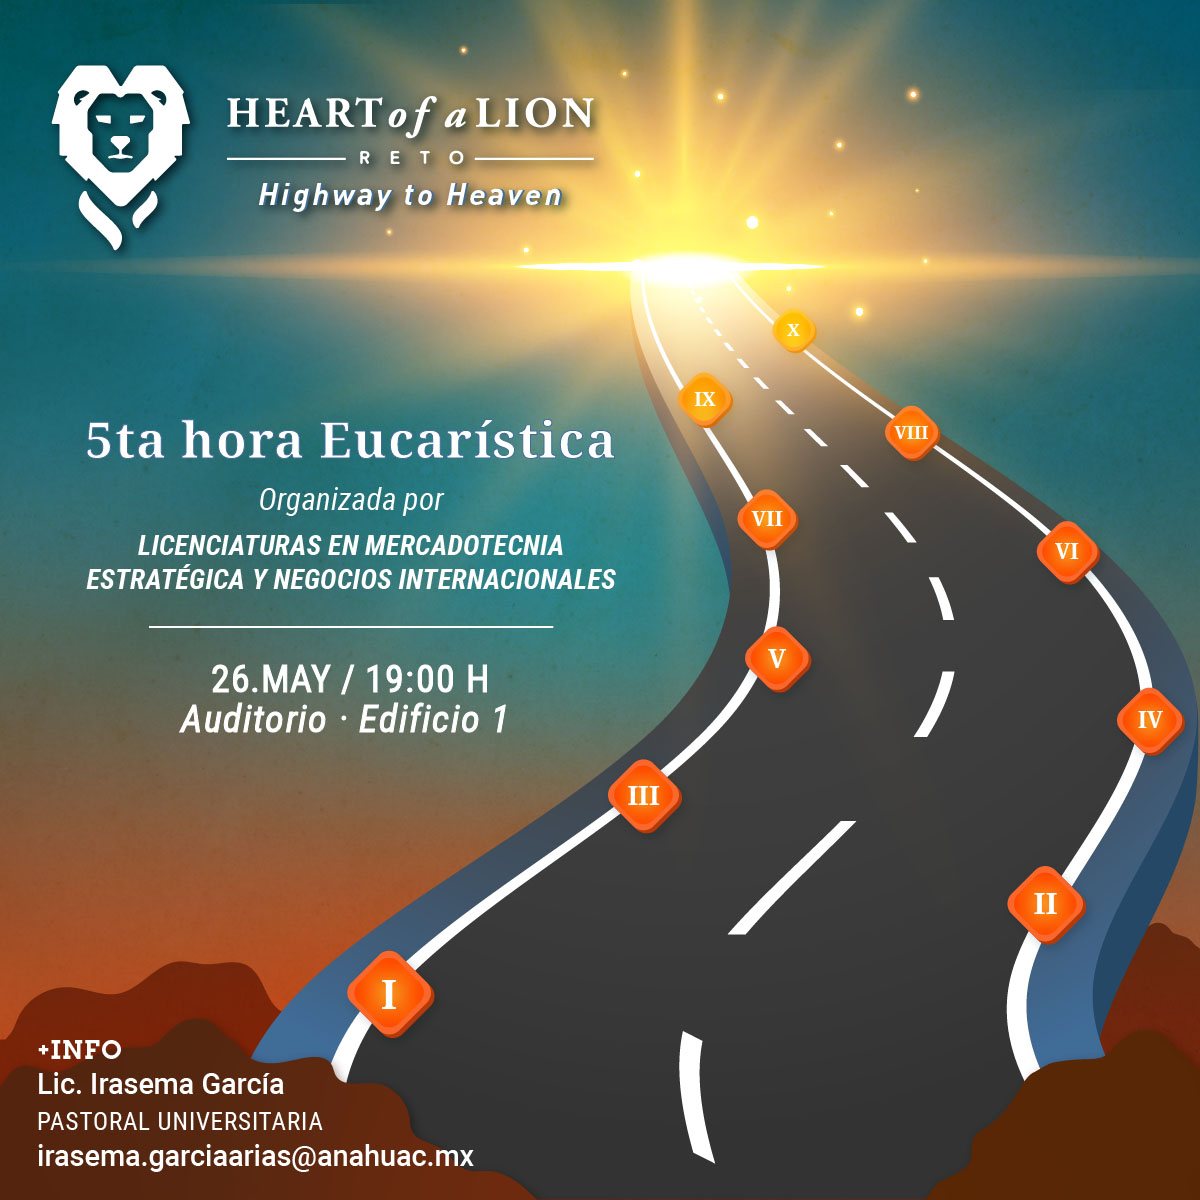 Heart of a Lion: Highway to Heaven